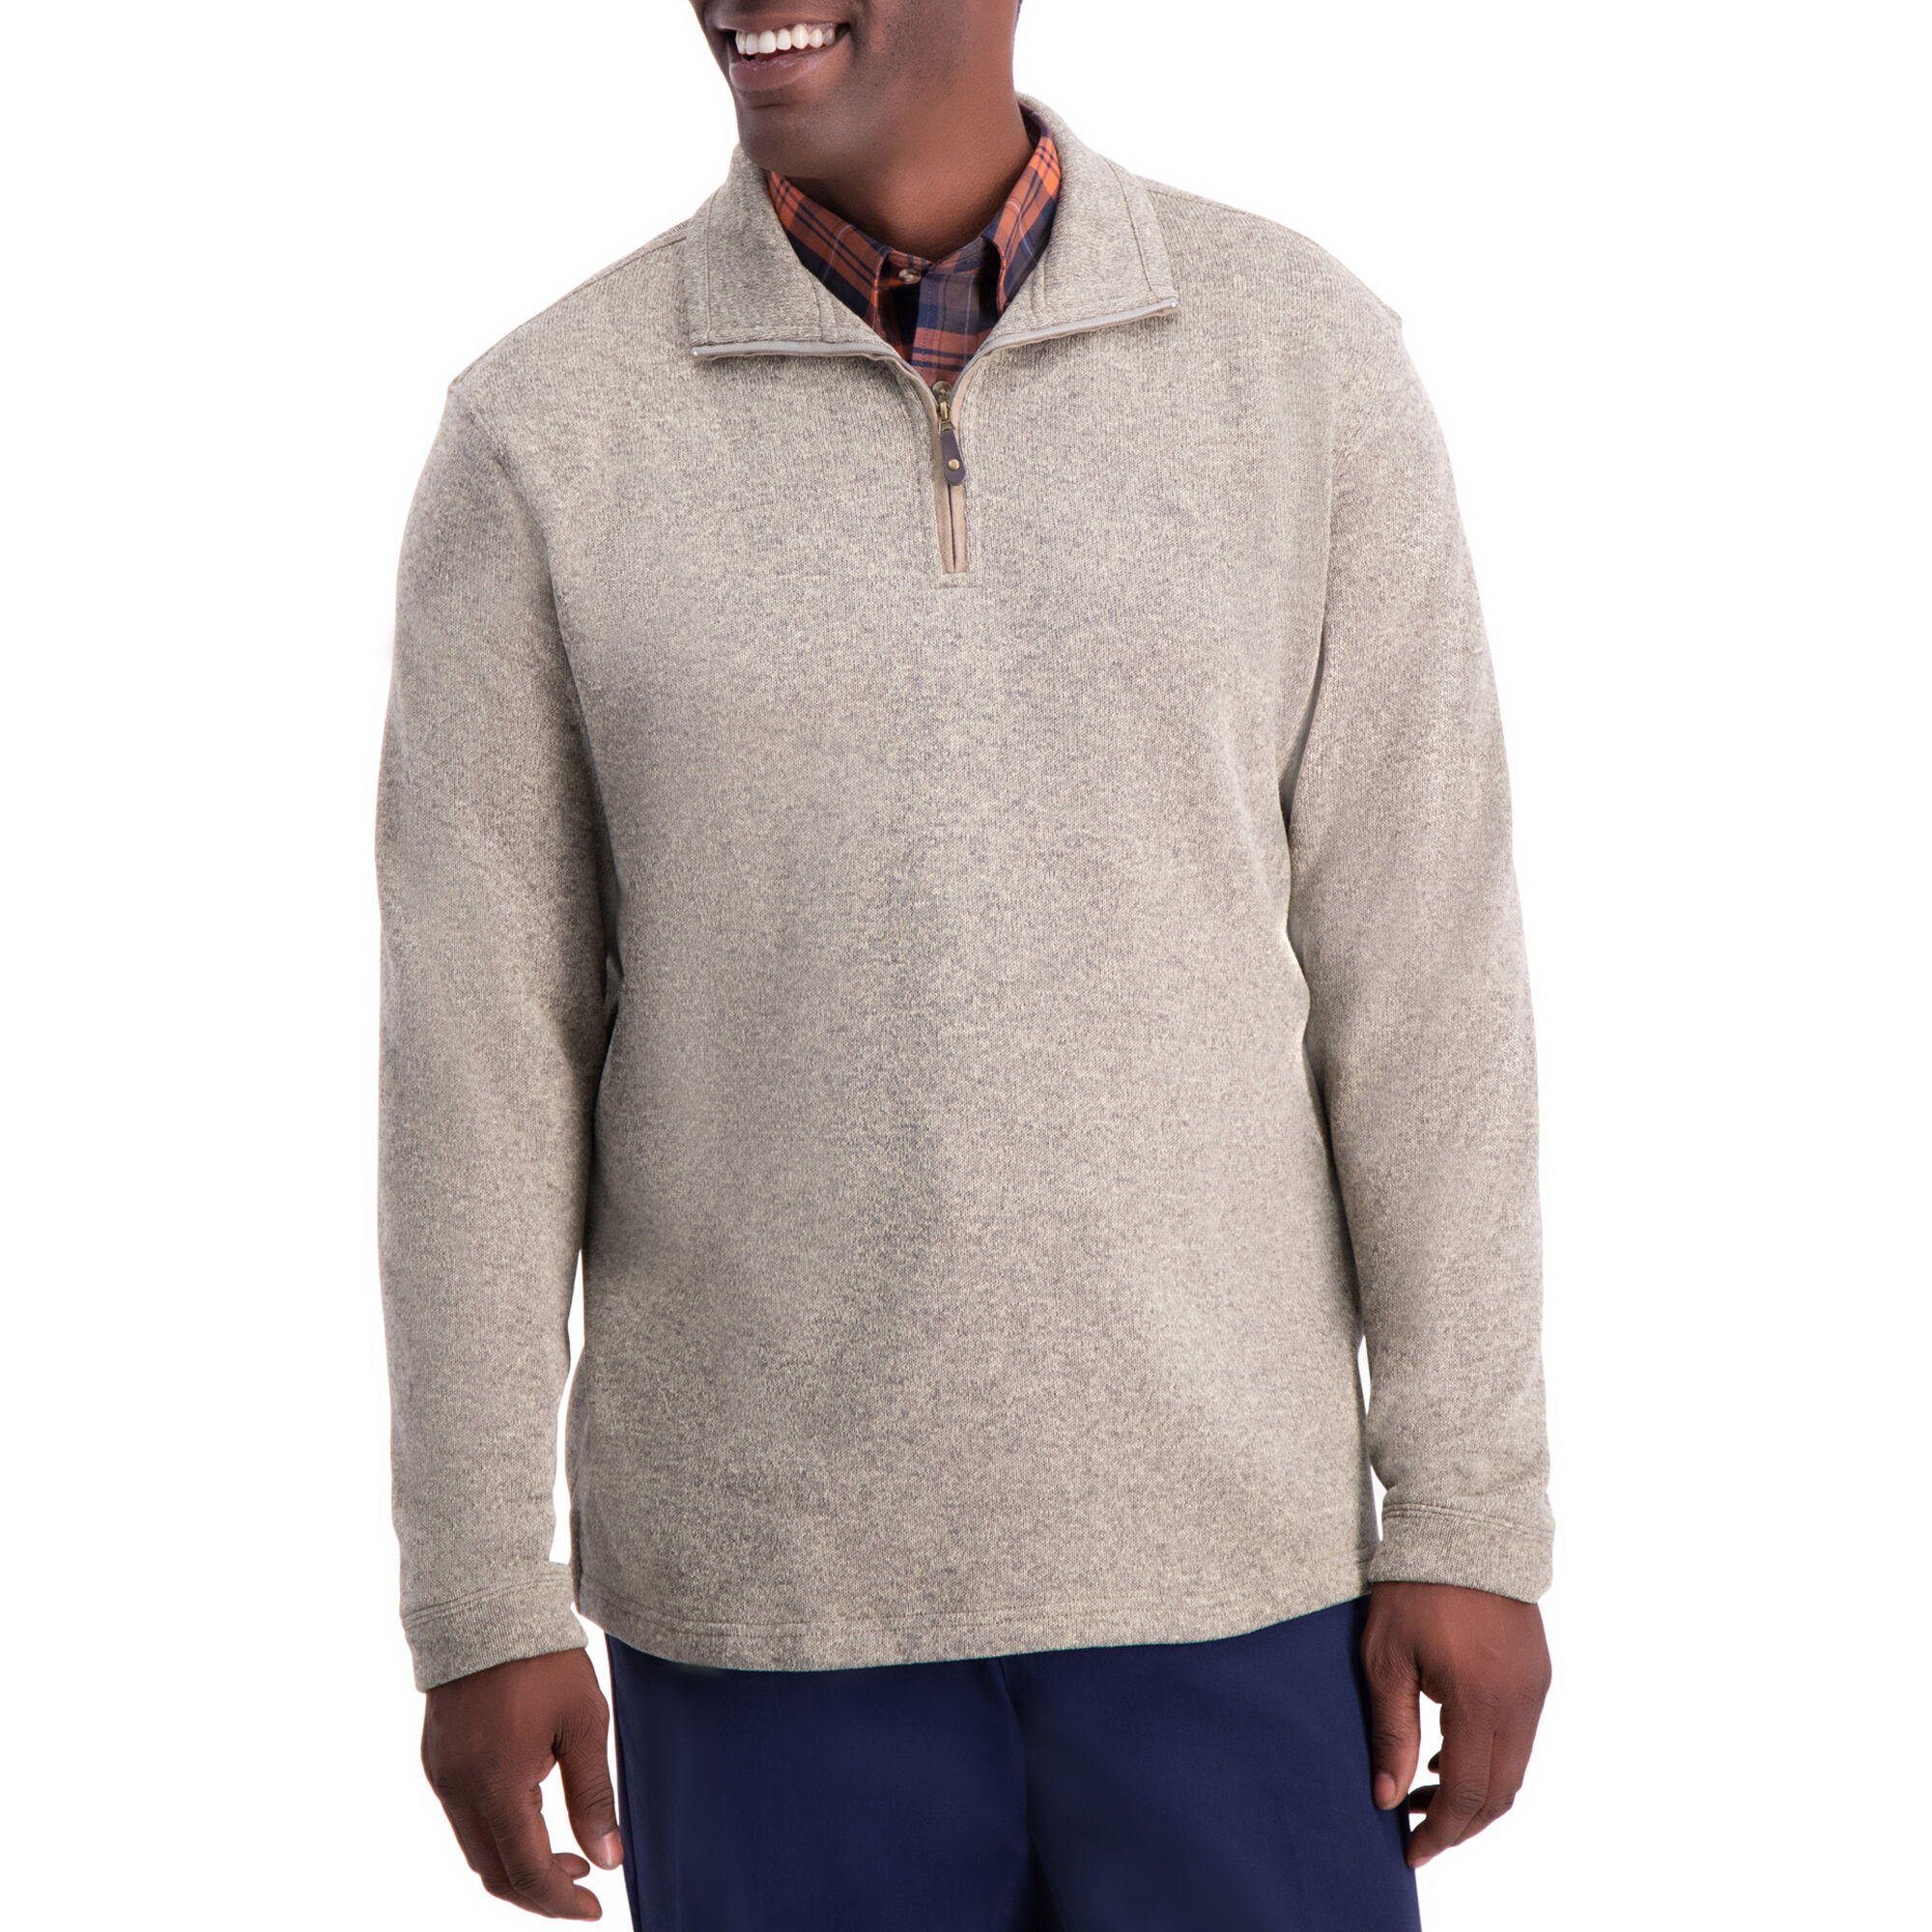 Haggar 1/4 Zip Knit Fleece Sweater Khaki 1/4 Zip Marled with Faux Suede 100% Polyester Machine Washable Imported Style #: 037301 Size - S